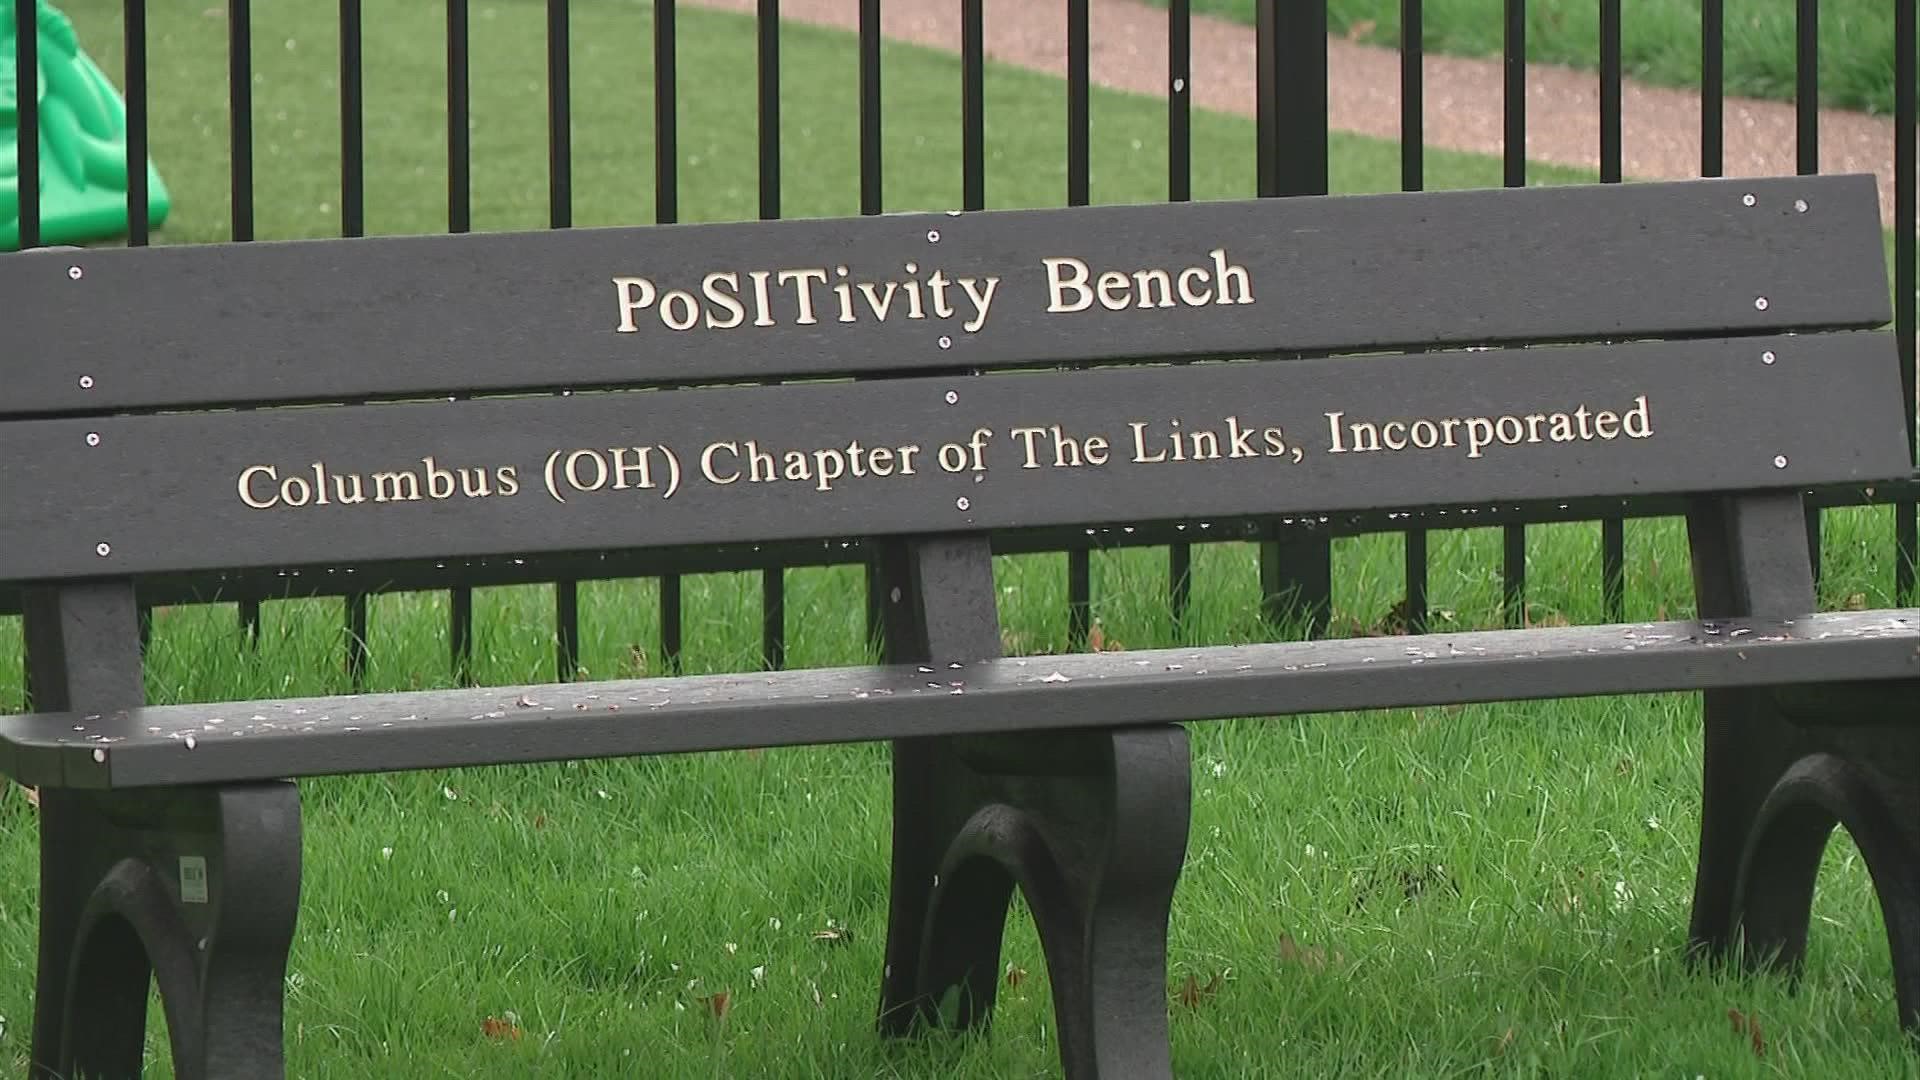 The benches are part of a movement to encourage safe spaces and mental health in the pandemic.